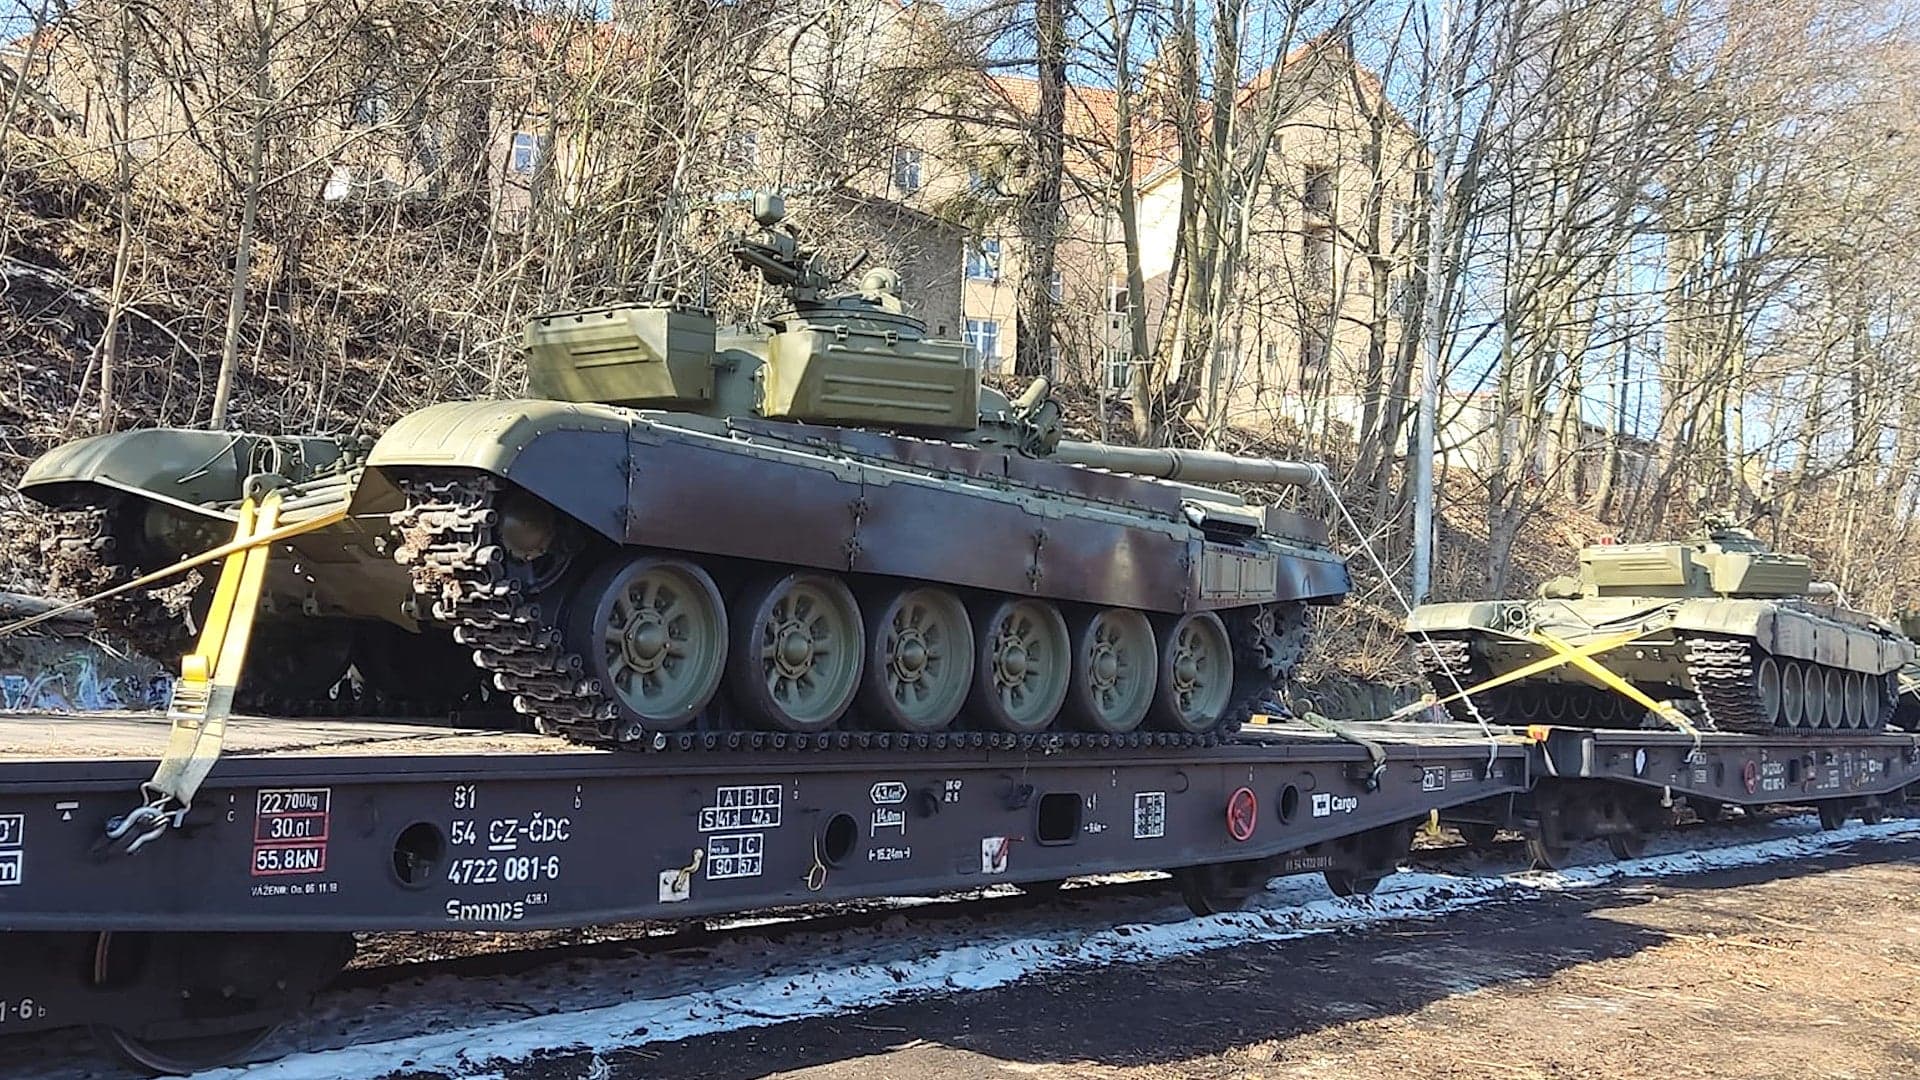 Ukraine Situation Report: Donated Czech T-72 Tanks, BMP-1 Armored Vehicles Headed To Ukraine